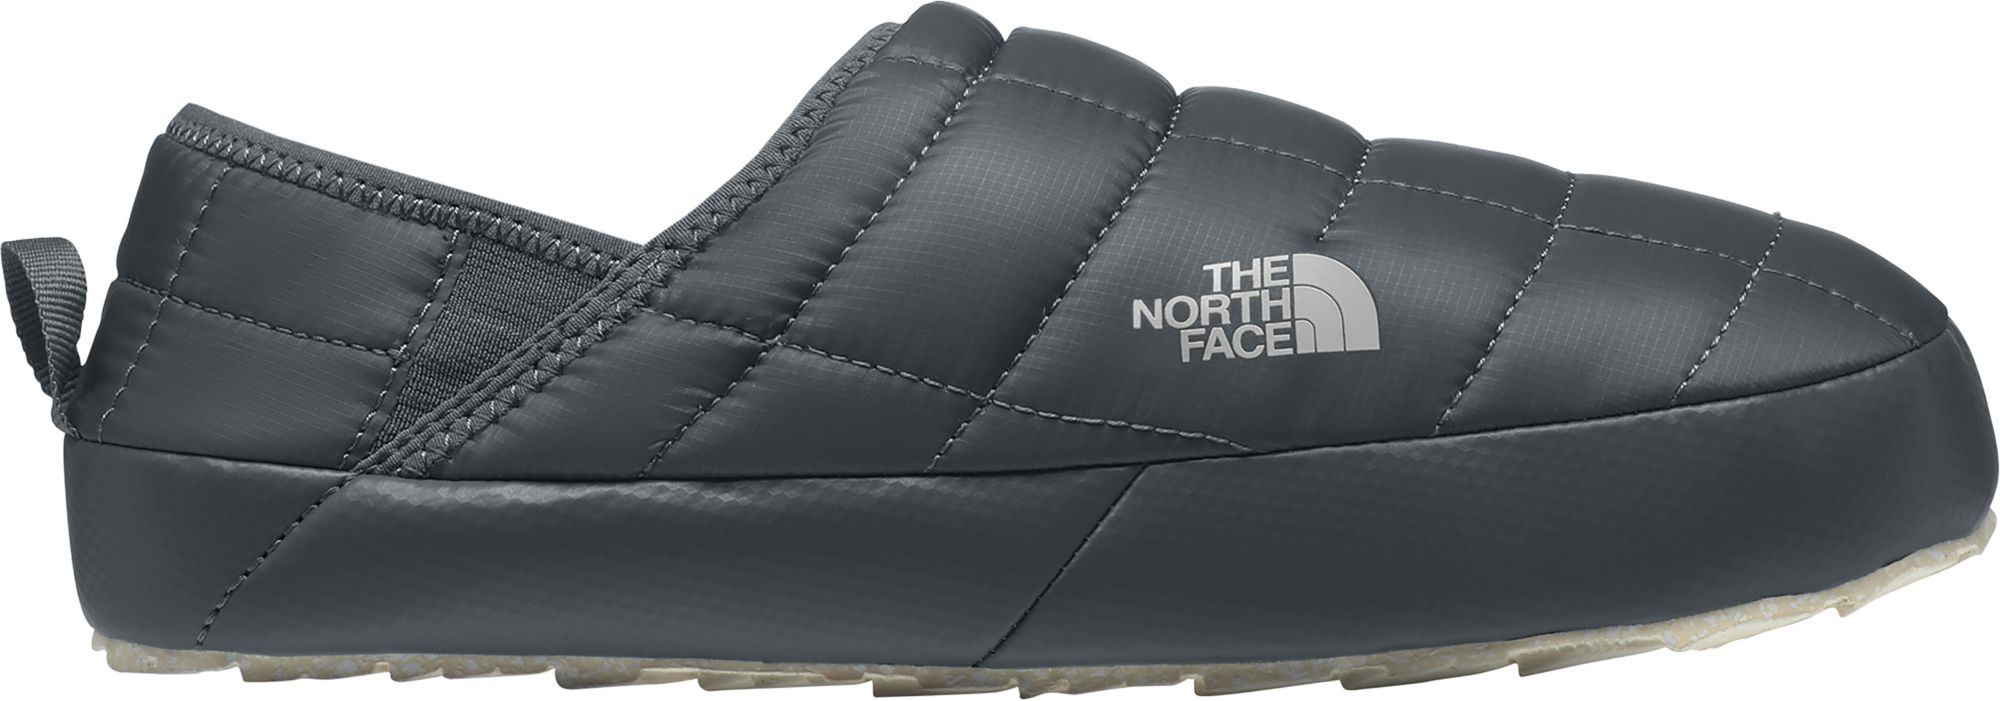 womens north face thermoball slippers